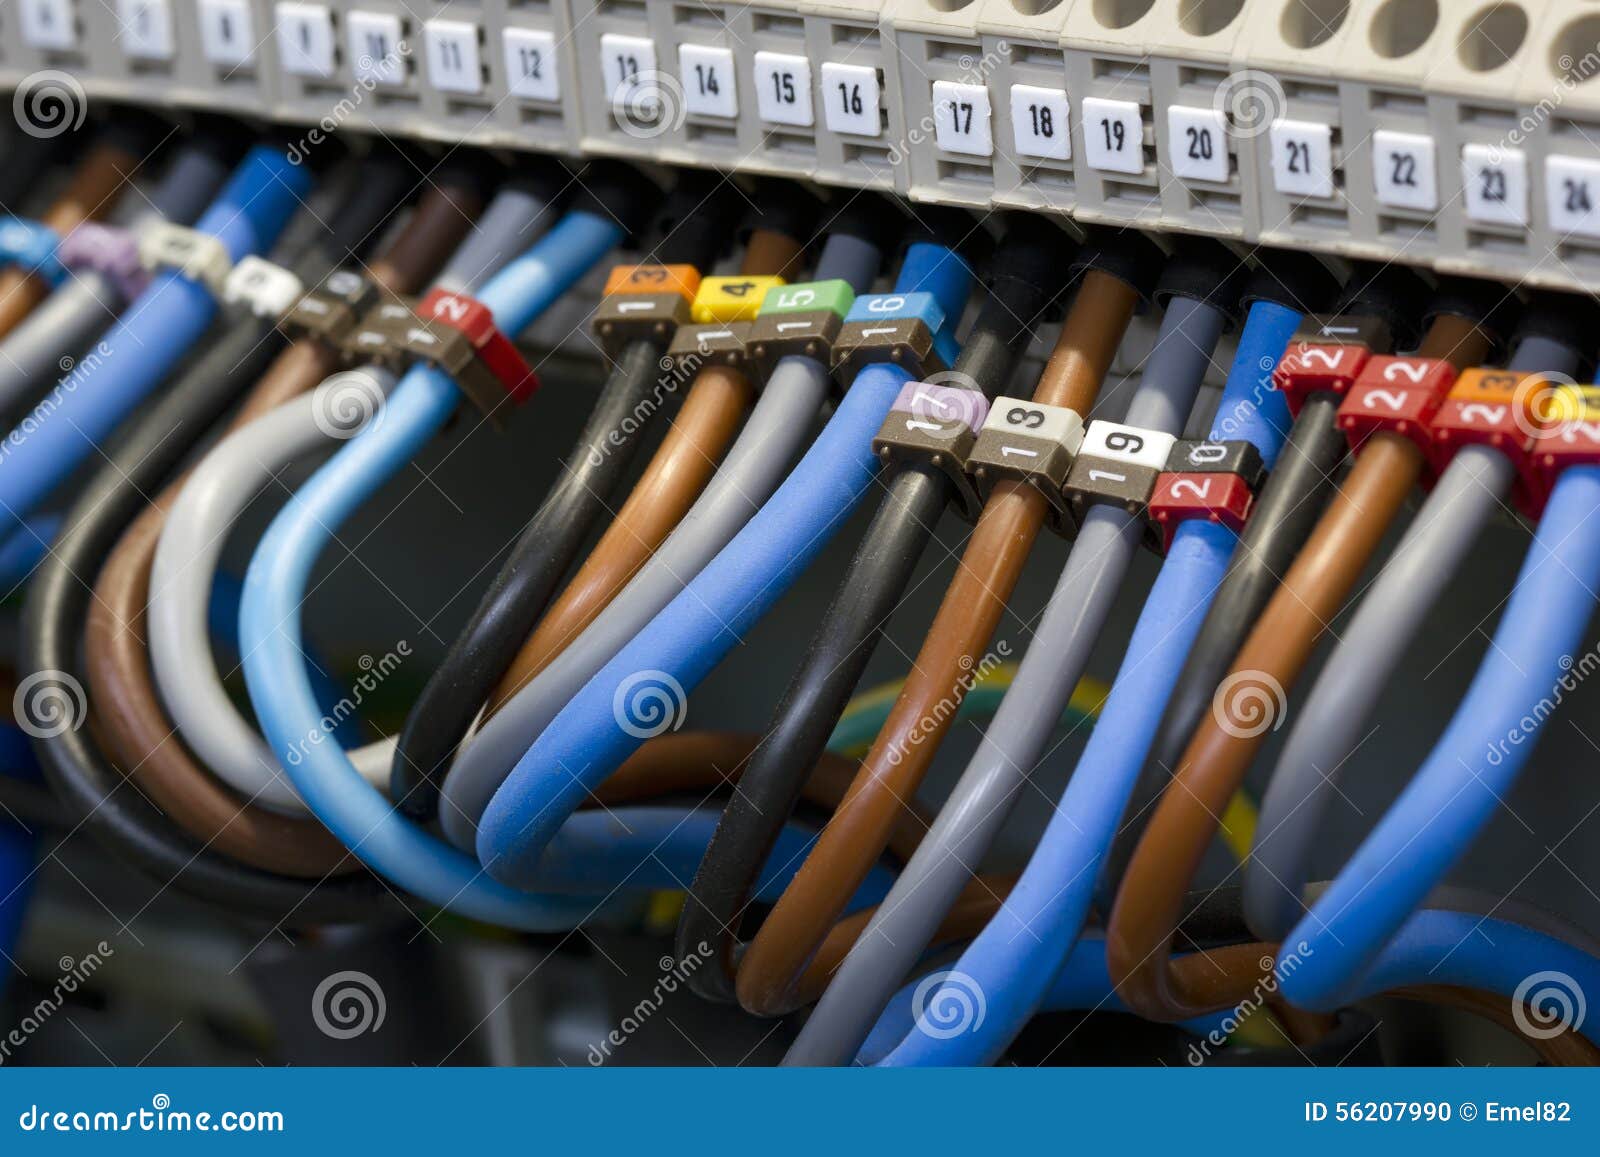 Electrical wiring stock photo. Image of circuit